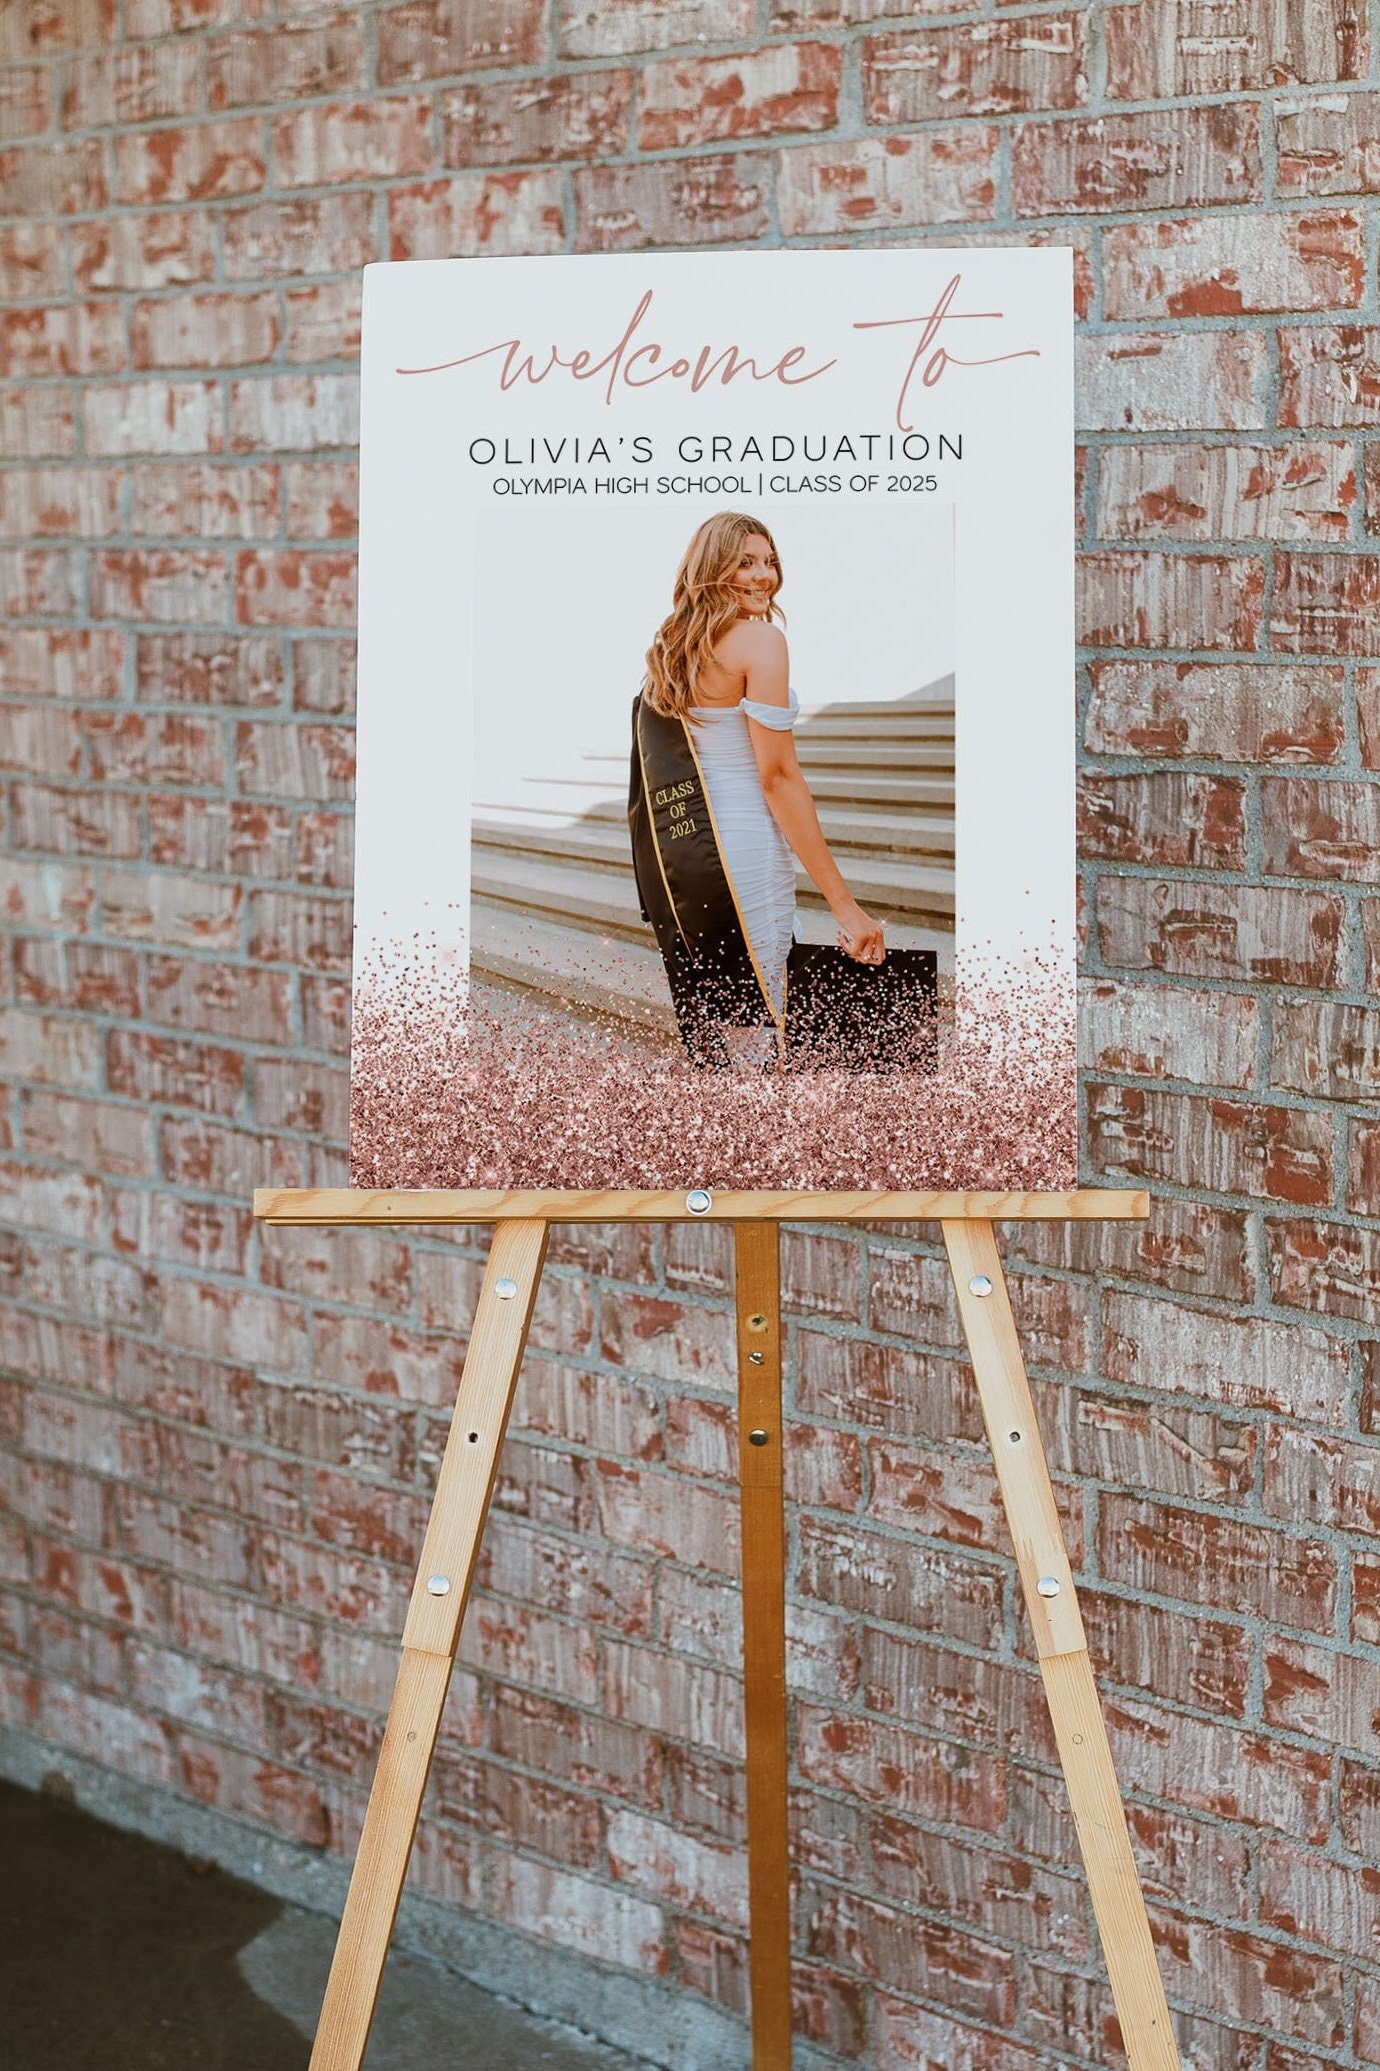 Rose Gold Easel for Wedding Easel Floor Easel Wood Easel Stand for Wedding  Sign Solid Wood Easel, up to 20lbs, up to 30 X 40 Inches 